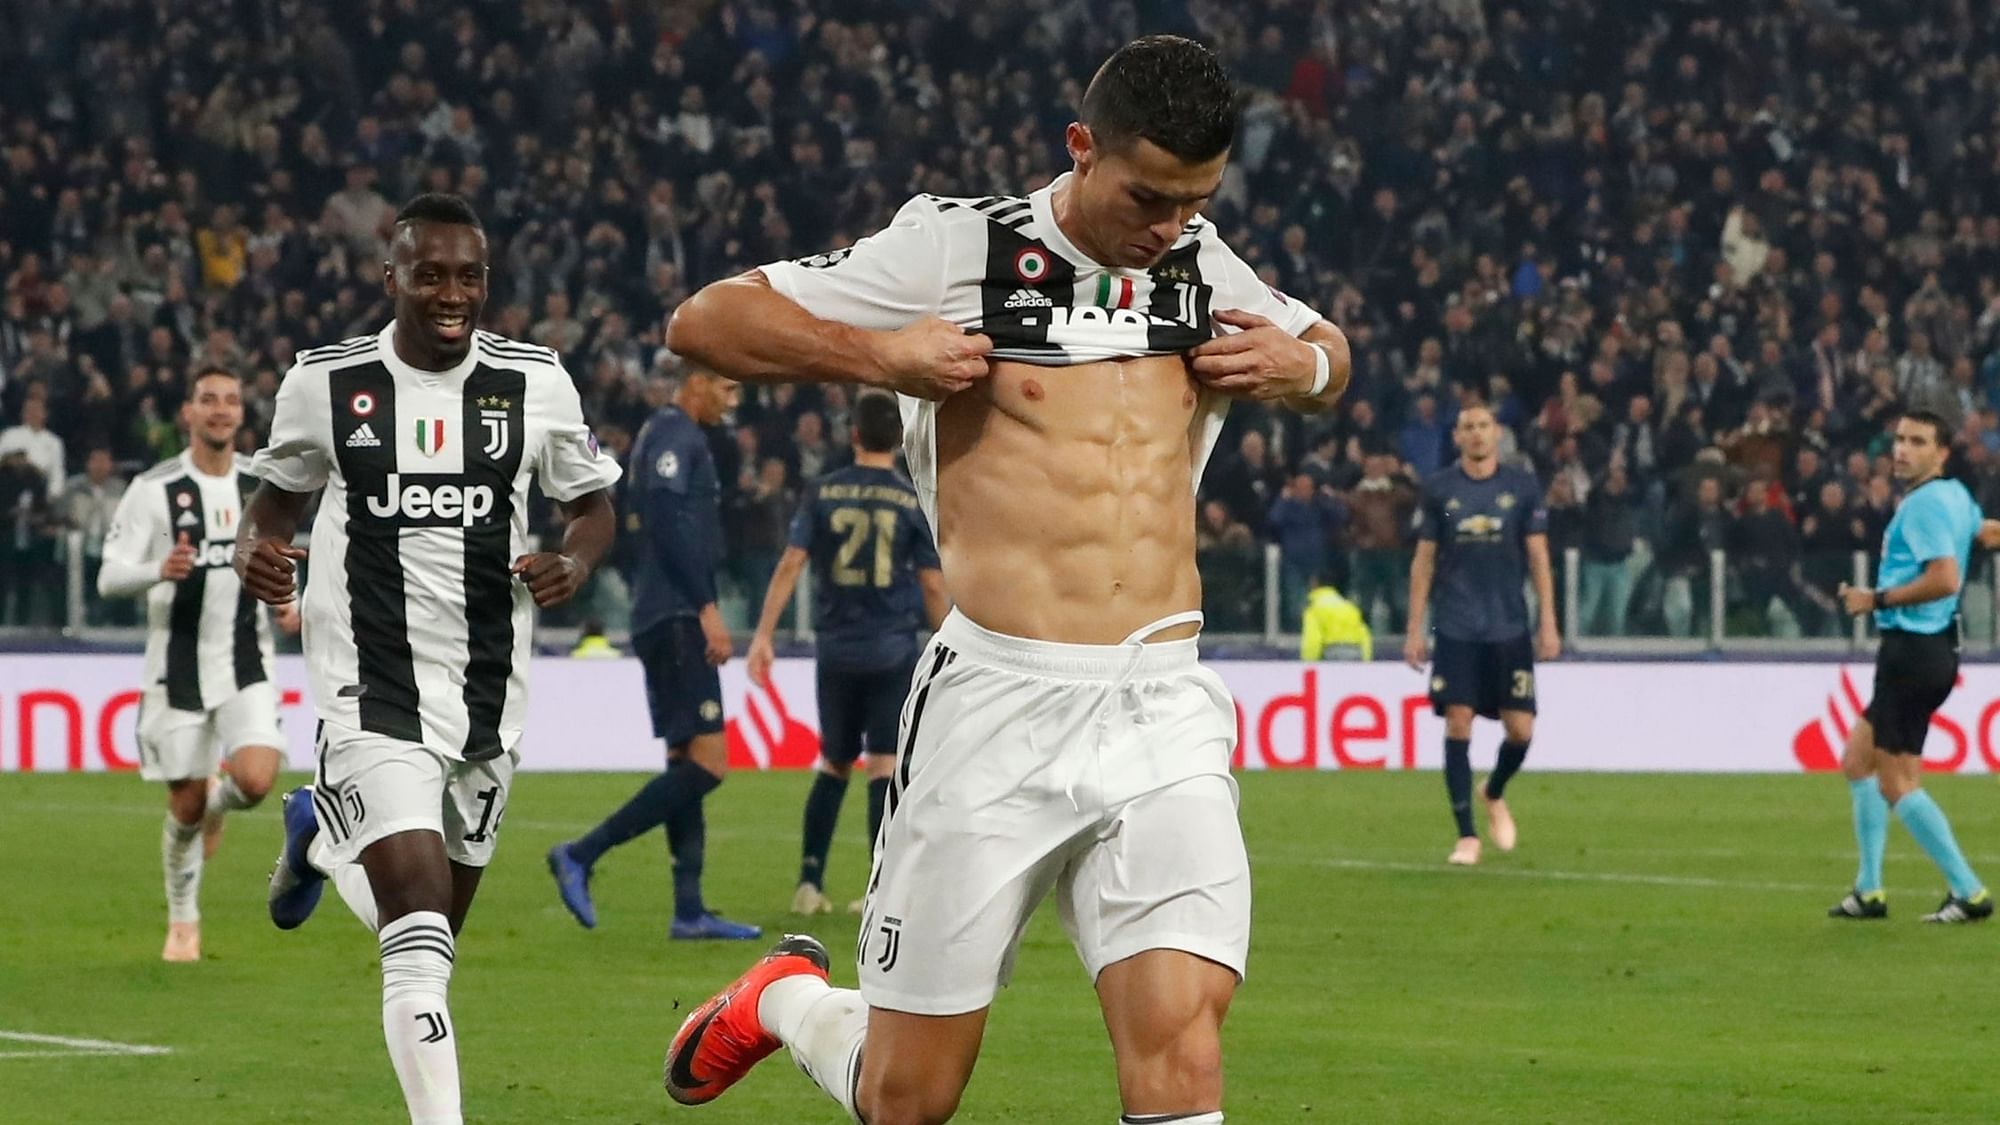  In this Wednesday, Nov. 7, 2018 file photo, Juventus forward Cristiano Ronaldo celebrates after scoring his side’s opening goal during the Champions League group H soccer match between Juventus and Manchester United at the Allianz stadium in Turin, Italy.&nbsp;